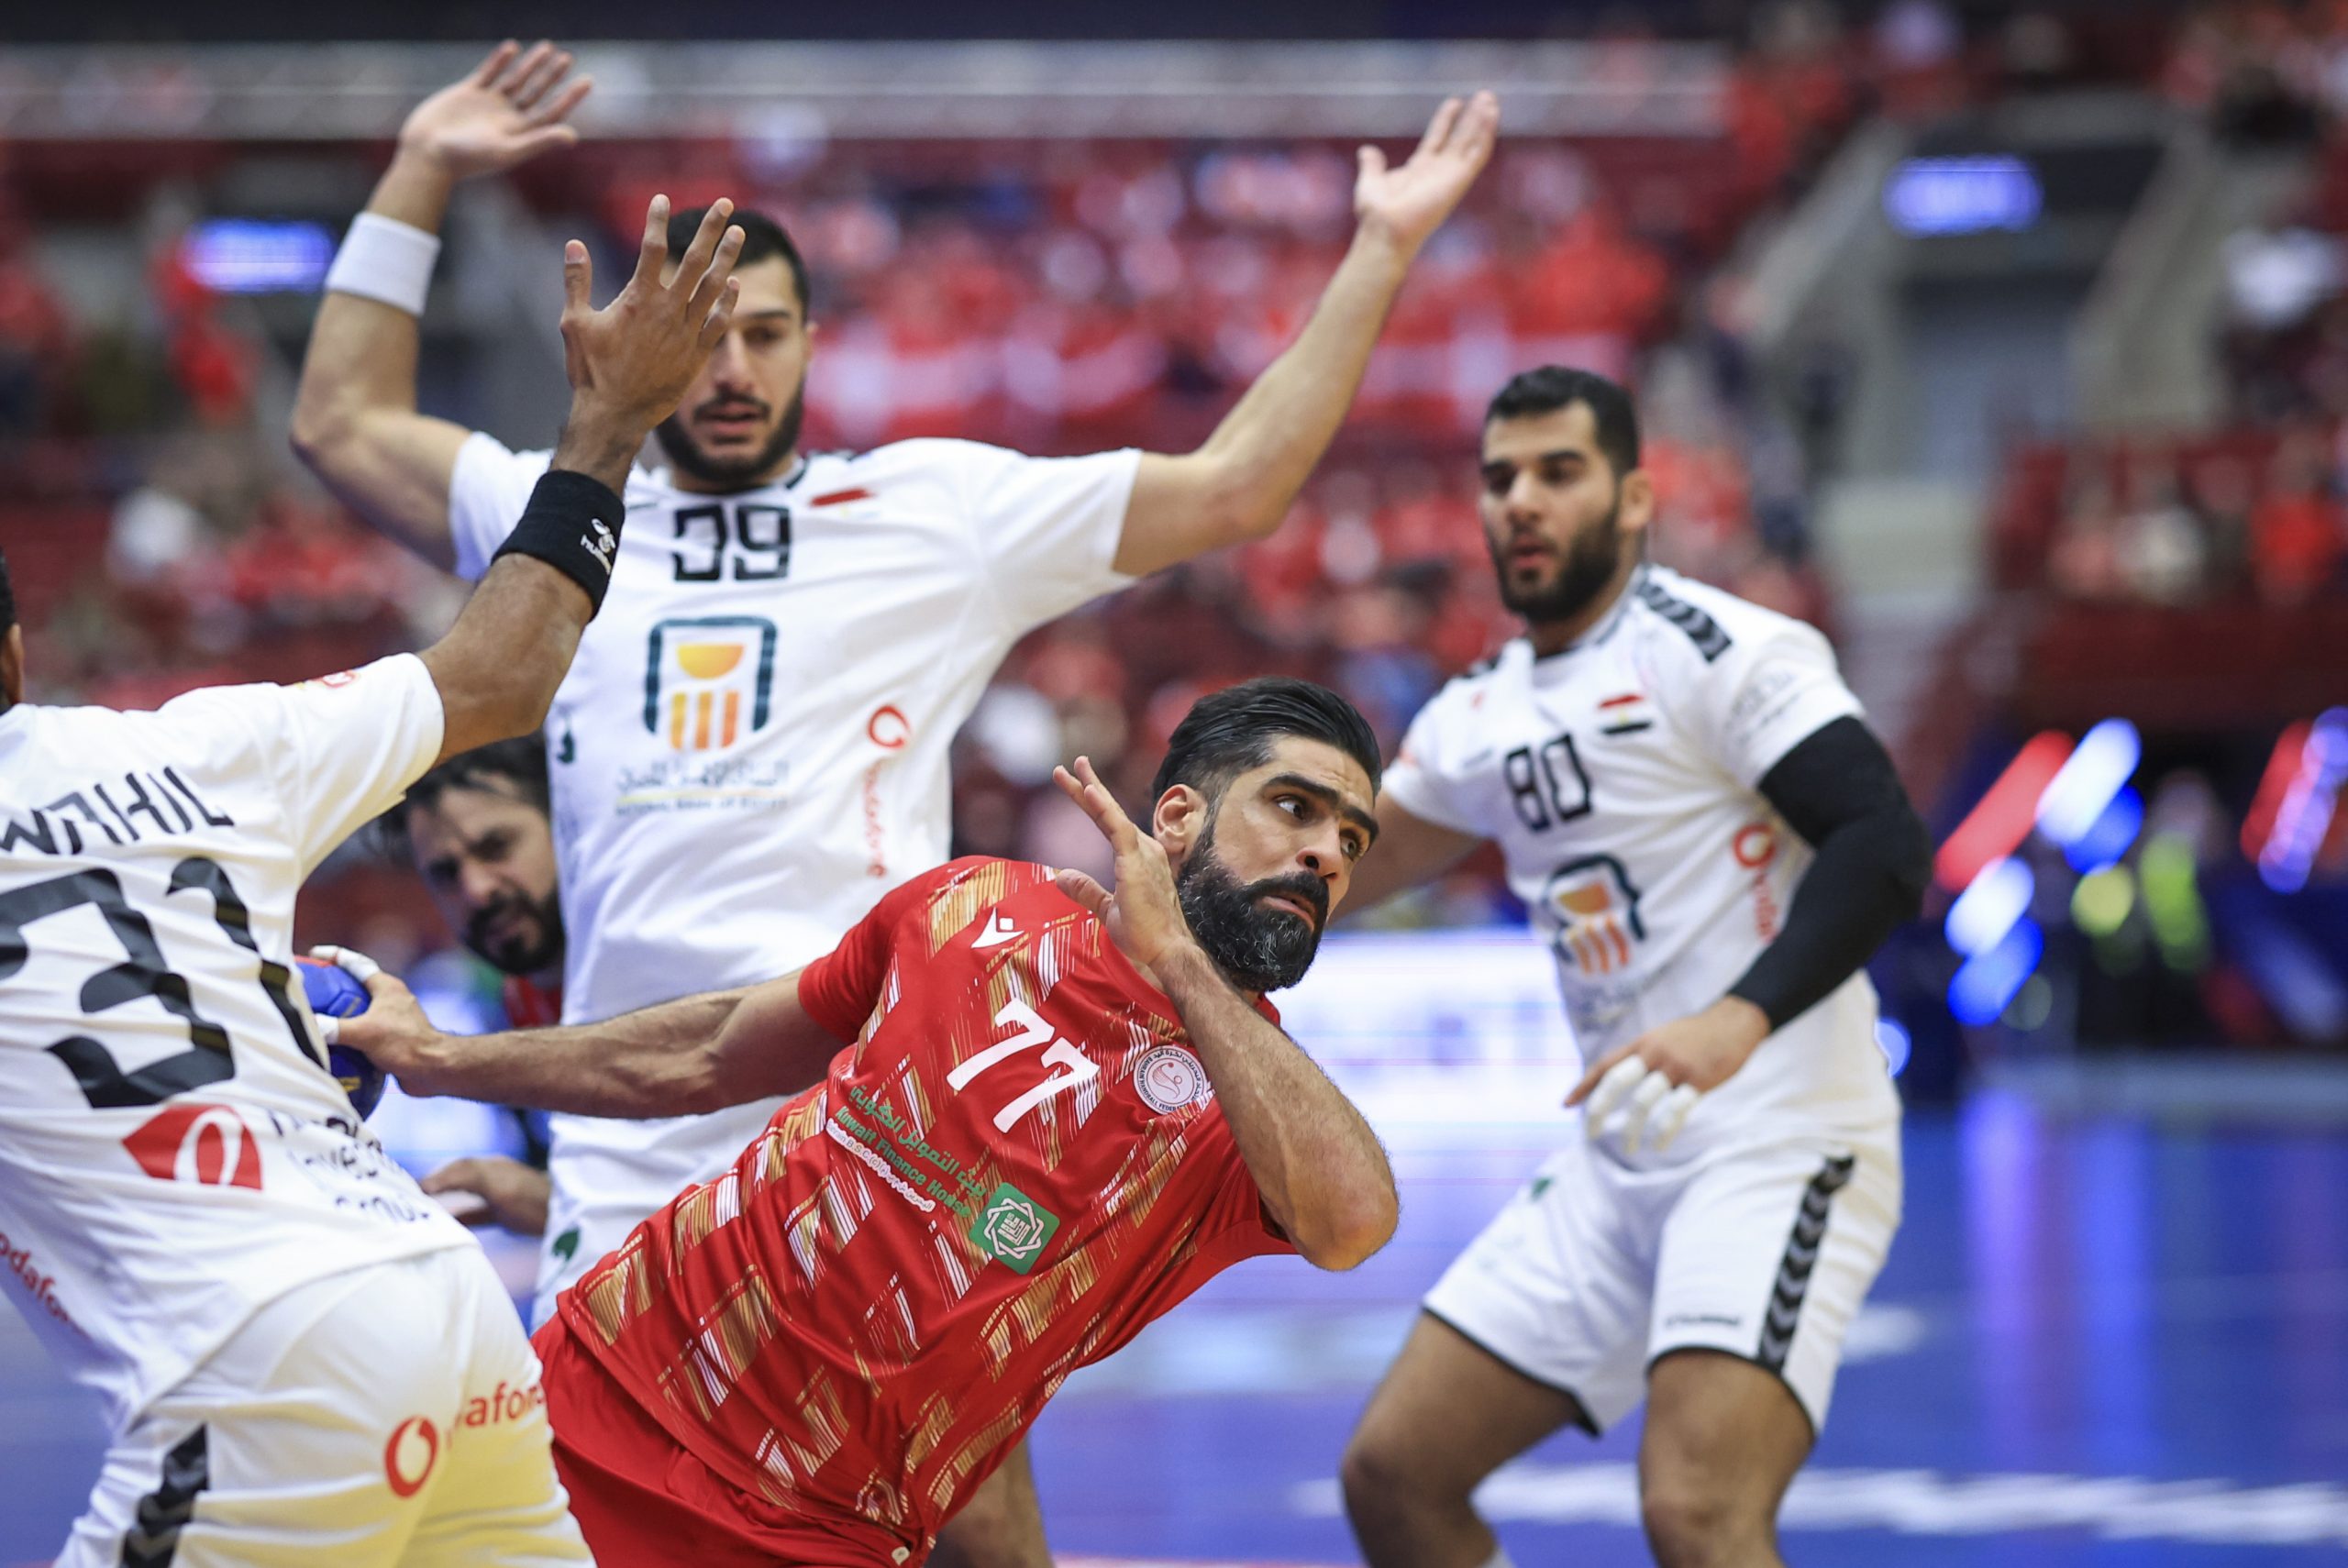 epa10420762 Bahrain's Ali Merza Ali in action during the IHF Men's World Championship handball match, Main Round group 4, between Bahrain and Egypt, in Malmo, Sweden, 21 January 2023.  EPA/Andreas Hillergren  SWEDEN OUT